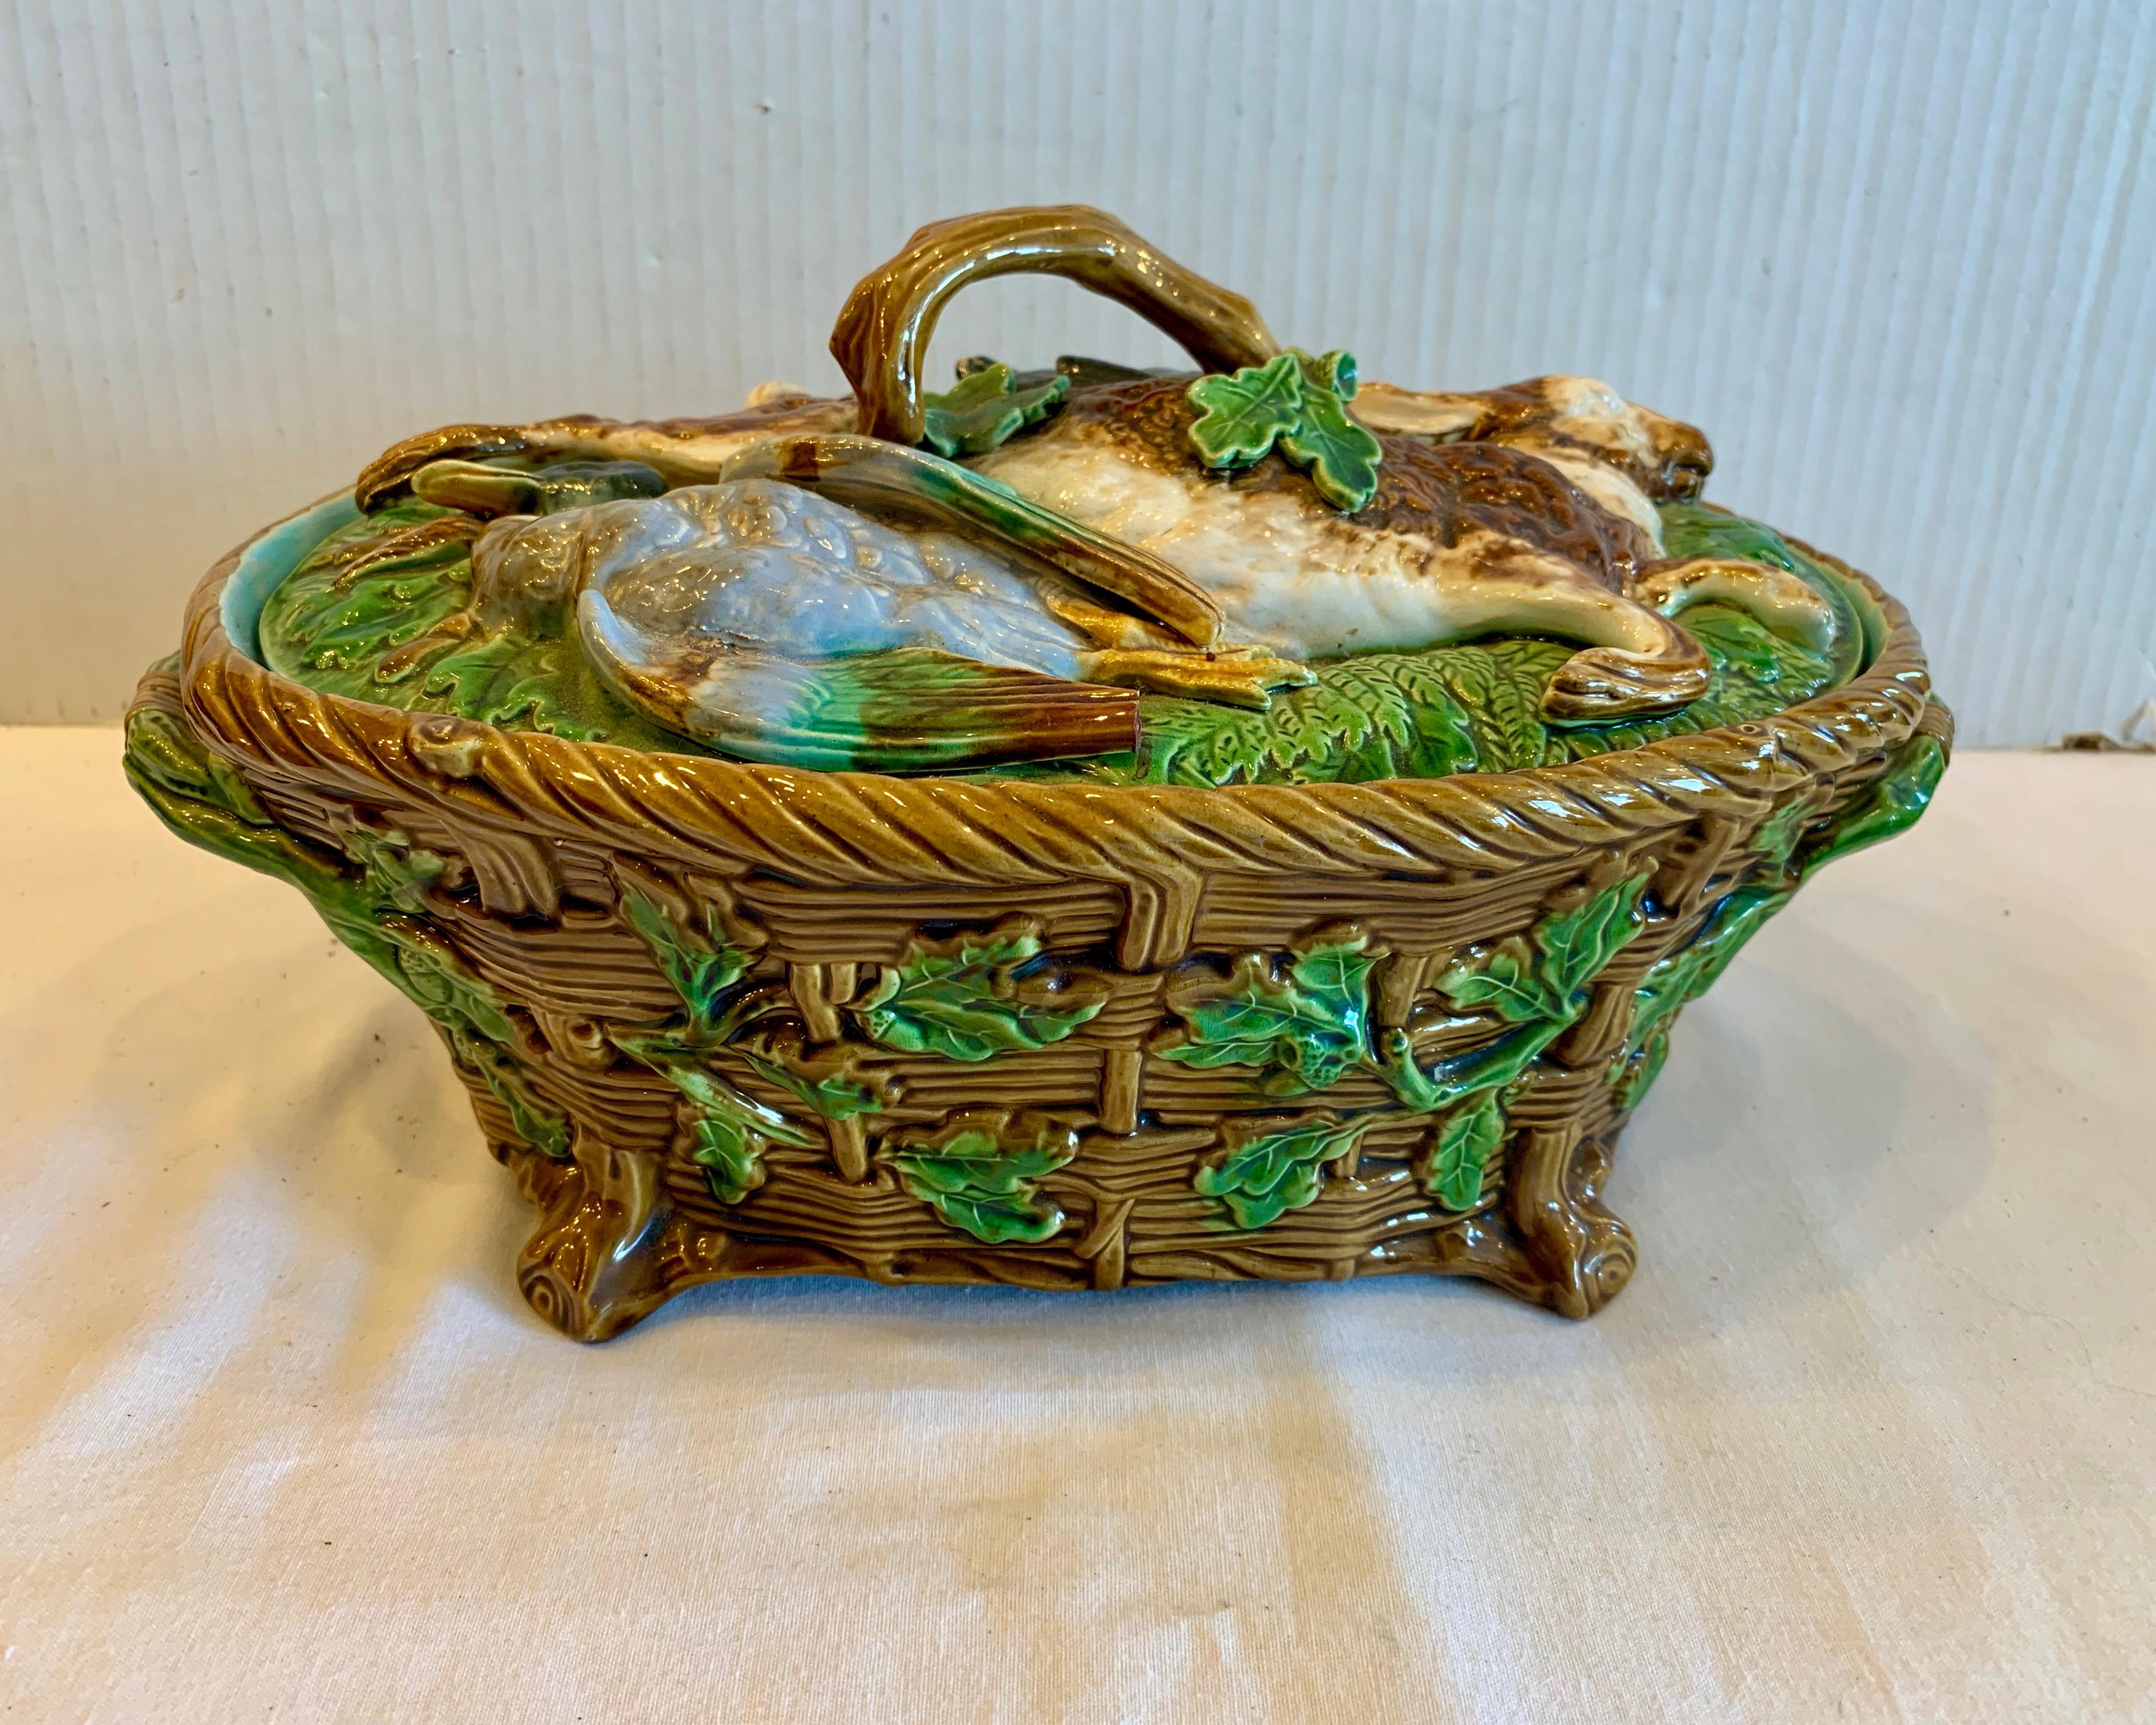 fashioned with a figure of a rabbit and a bird on its lid.
The piece is superbly detailed with basket form design and fitted with with 
handles at its sides.